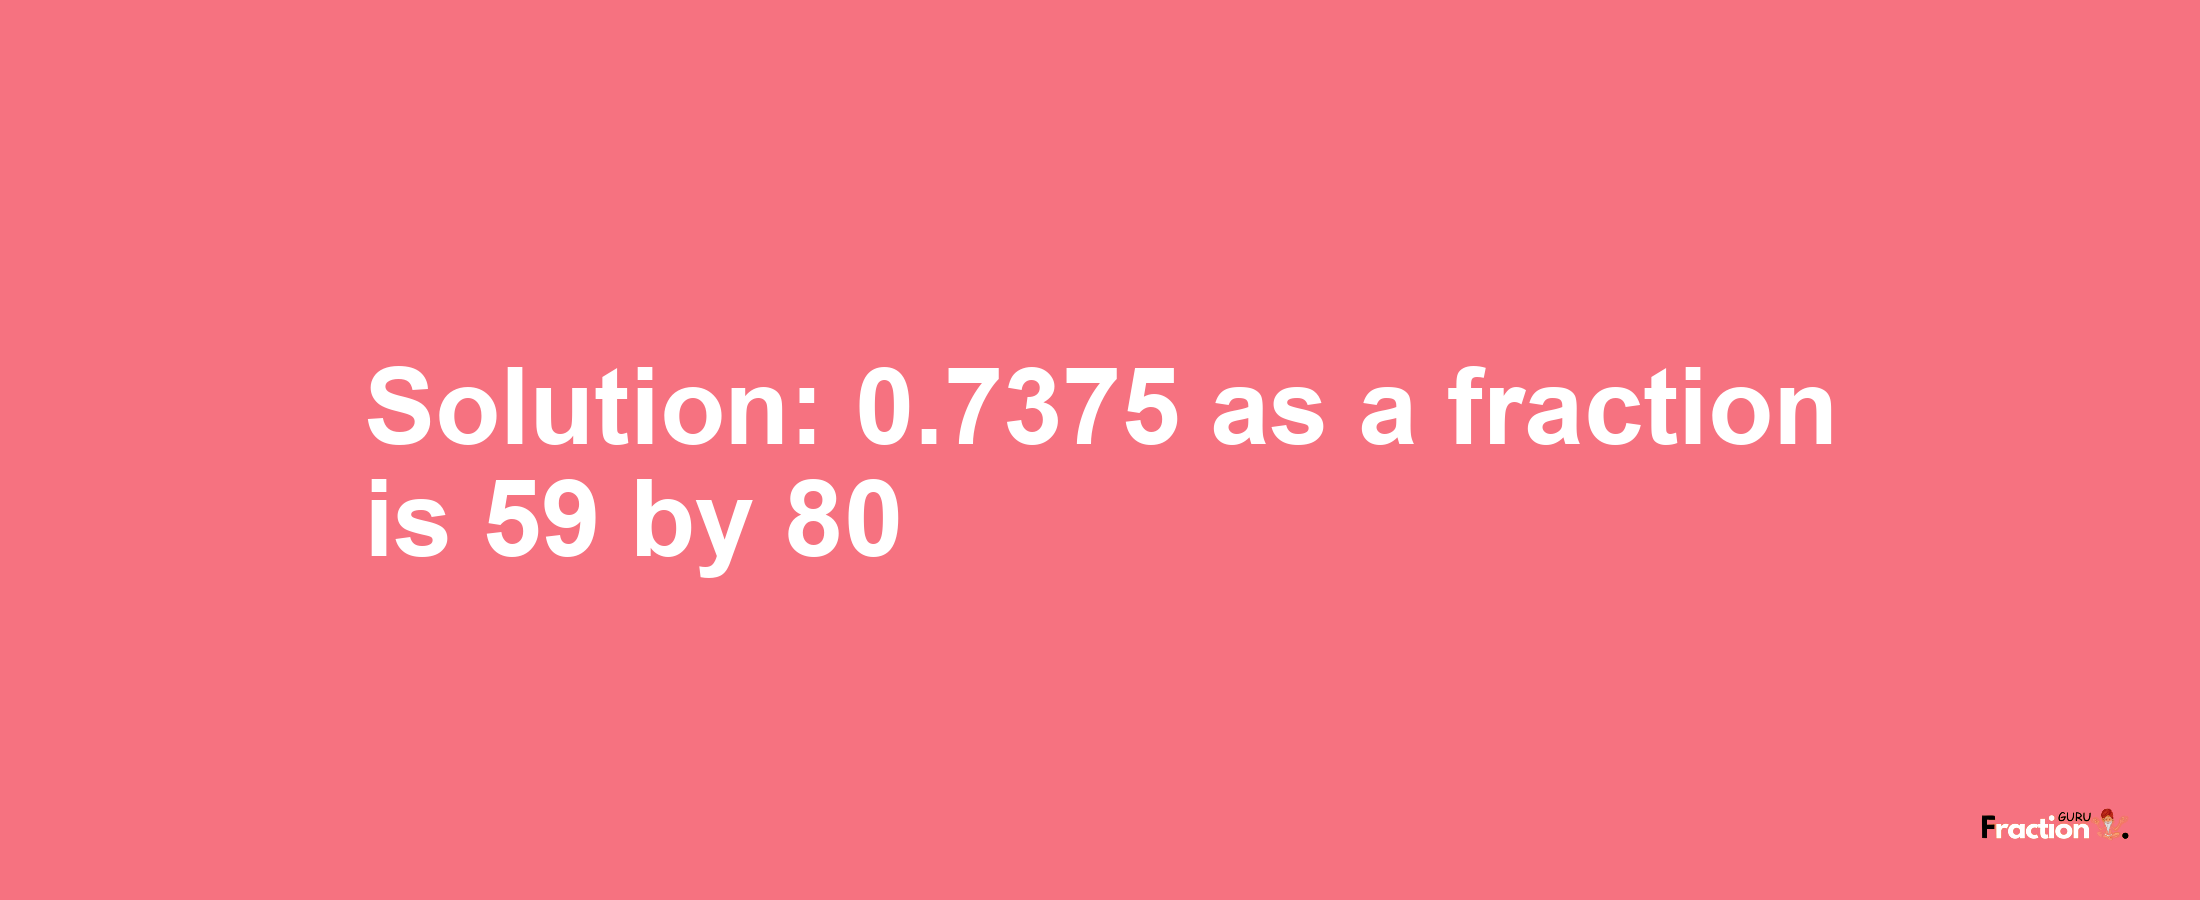 Solution:0.7375 as a fraction is 59/80